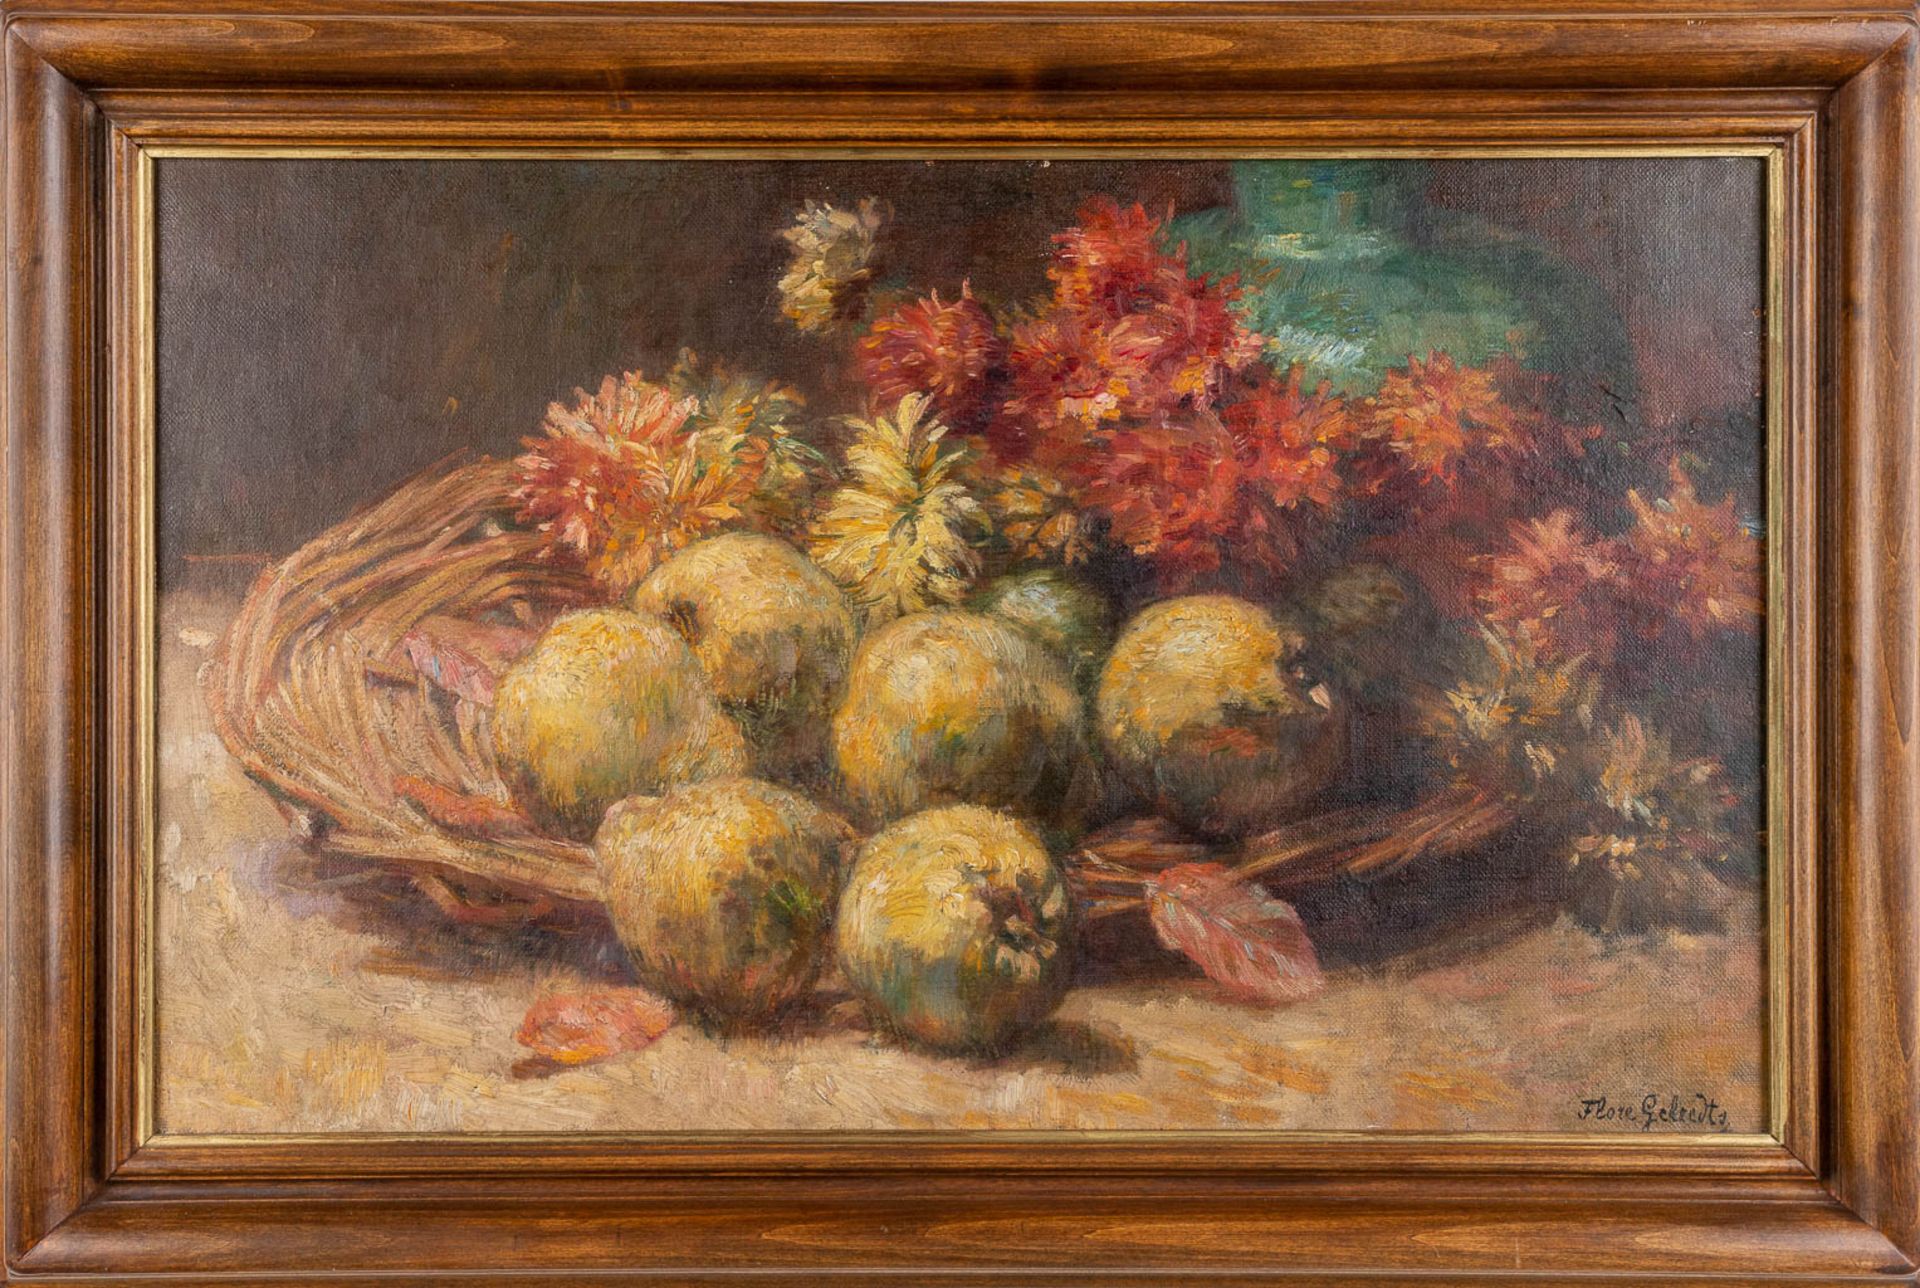 Flore GELEEDTS (1866-1938) 'Still life with Pears and Flowers' oil on canvas. (W:65,5 x H:40,5 cm) - Image 3 of 7